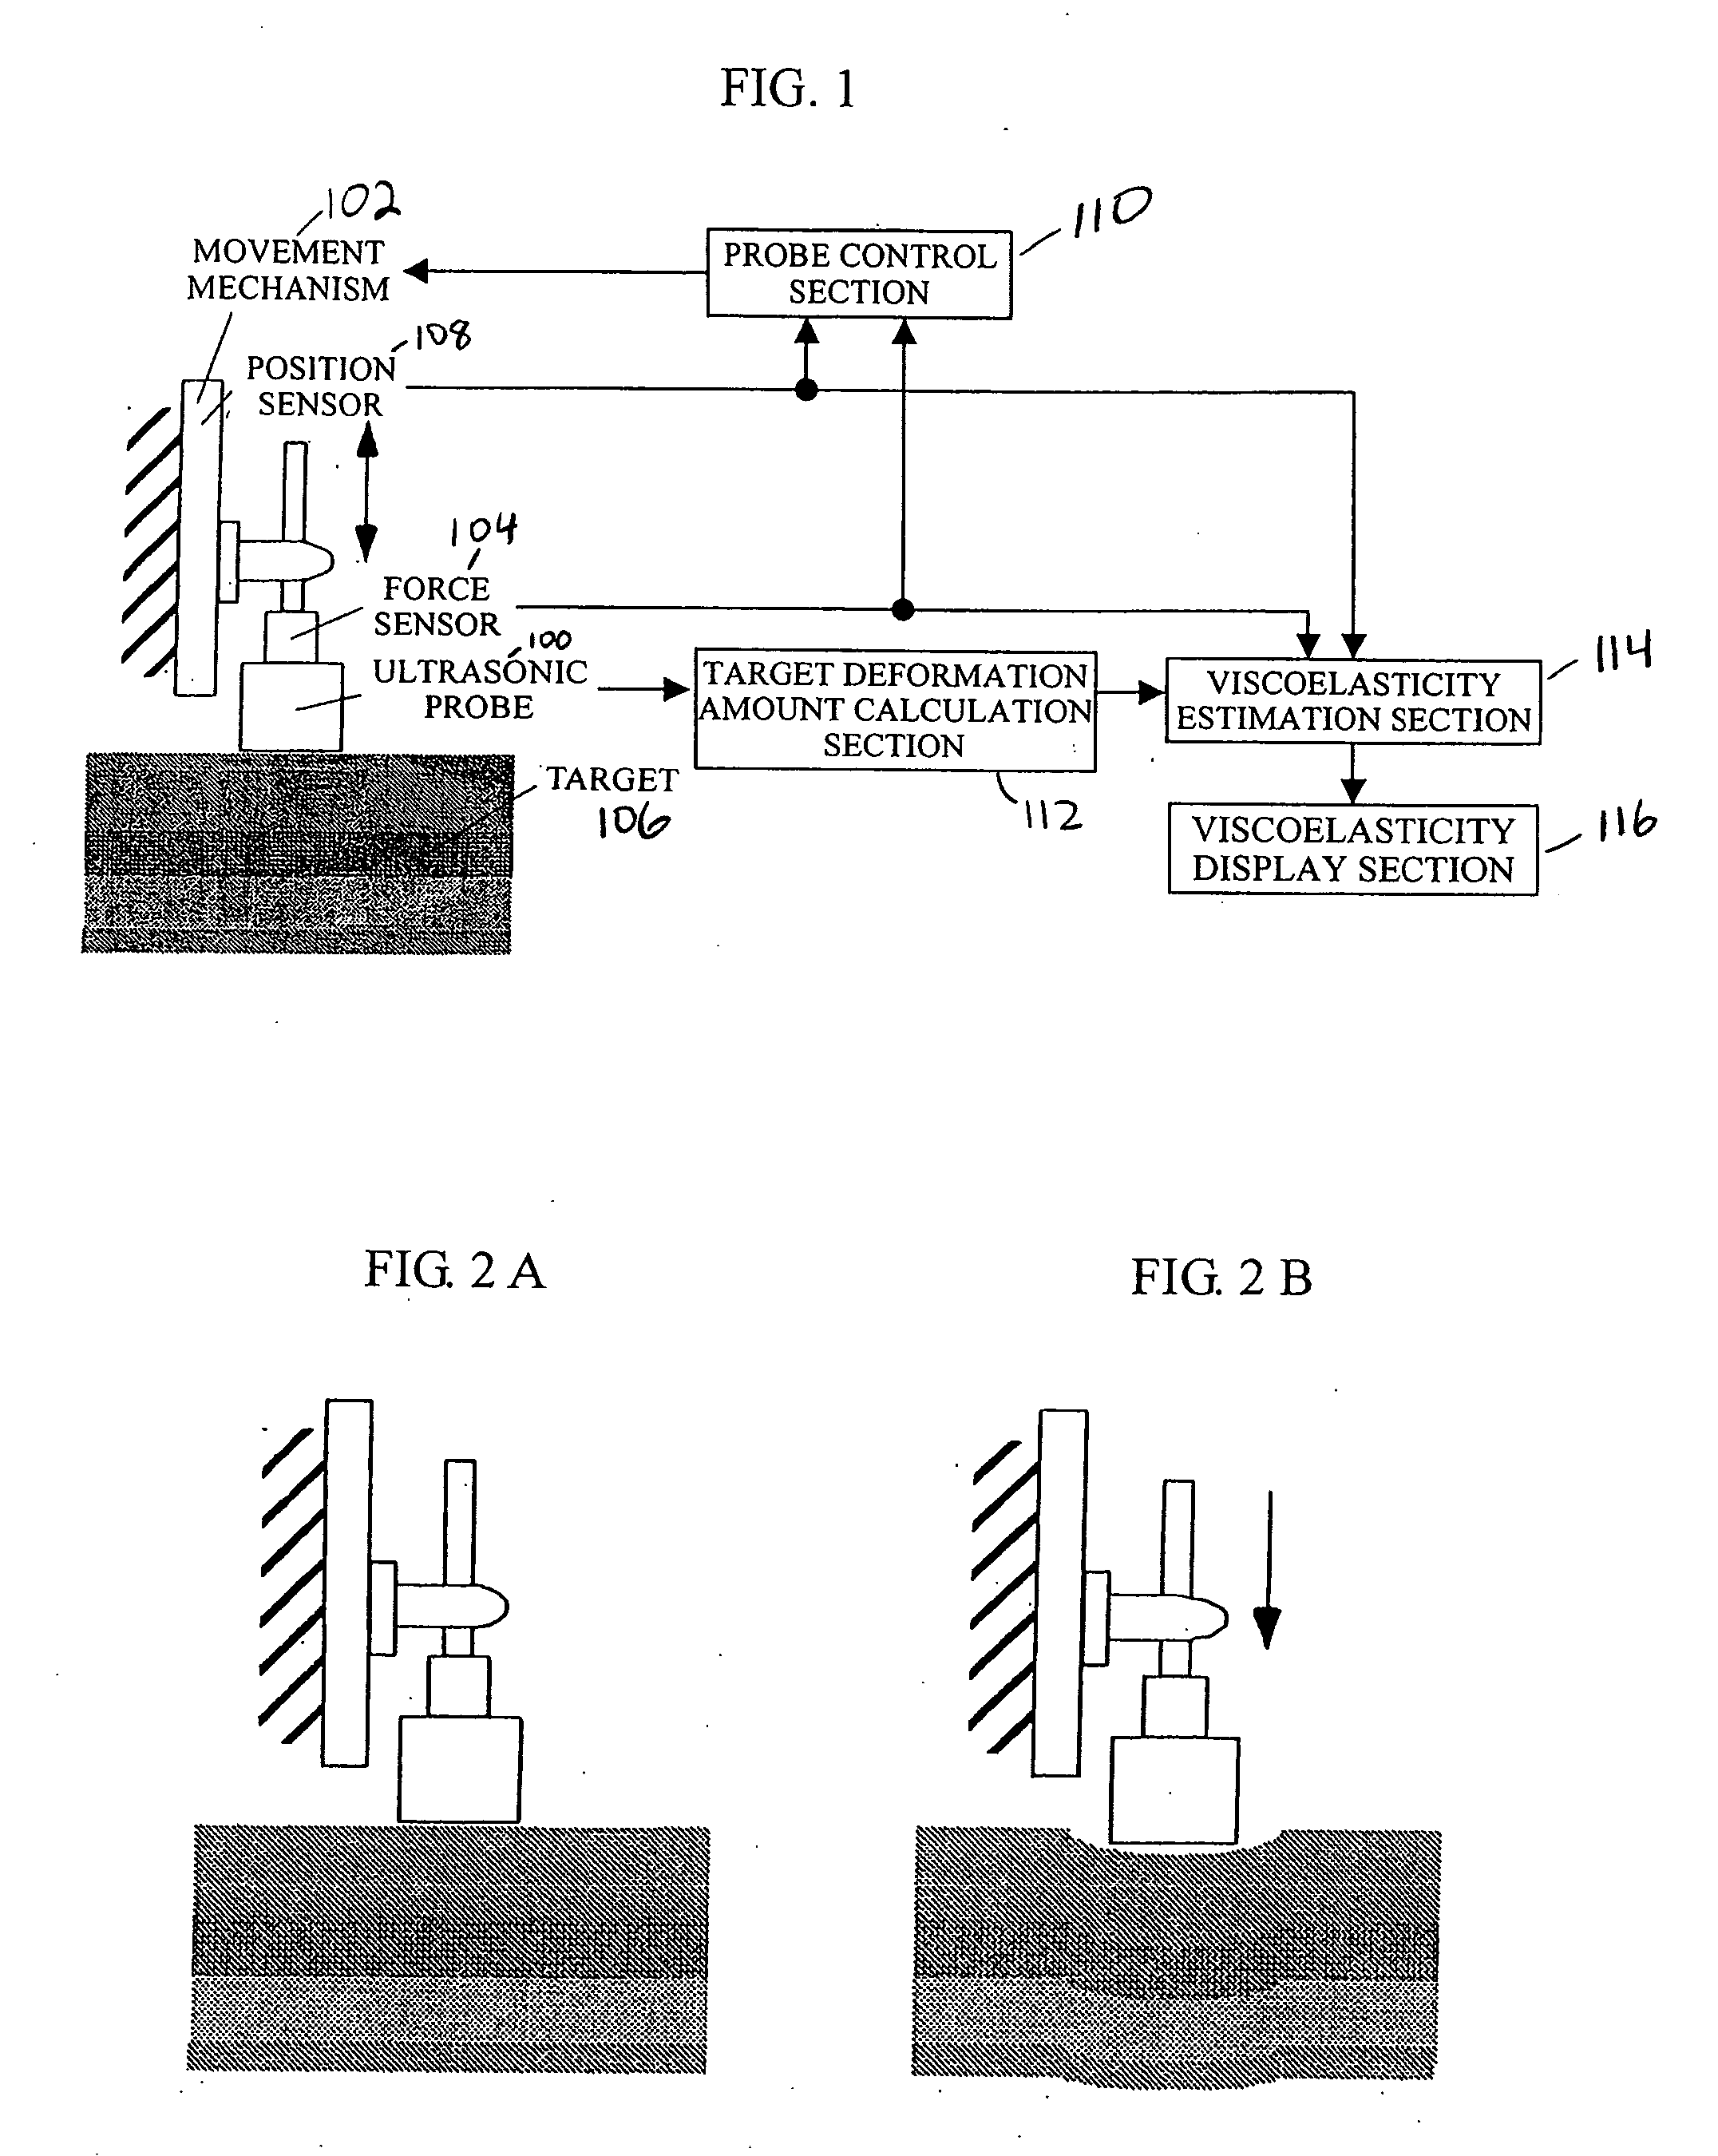 Apparatus and program for estimating viscoelasticity of soft tissue using ultrasound